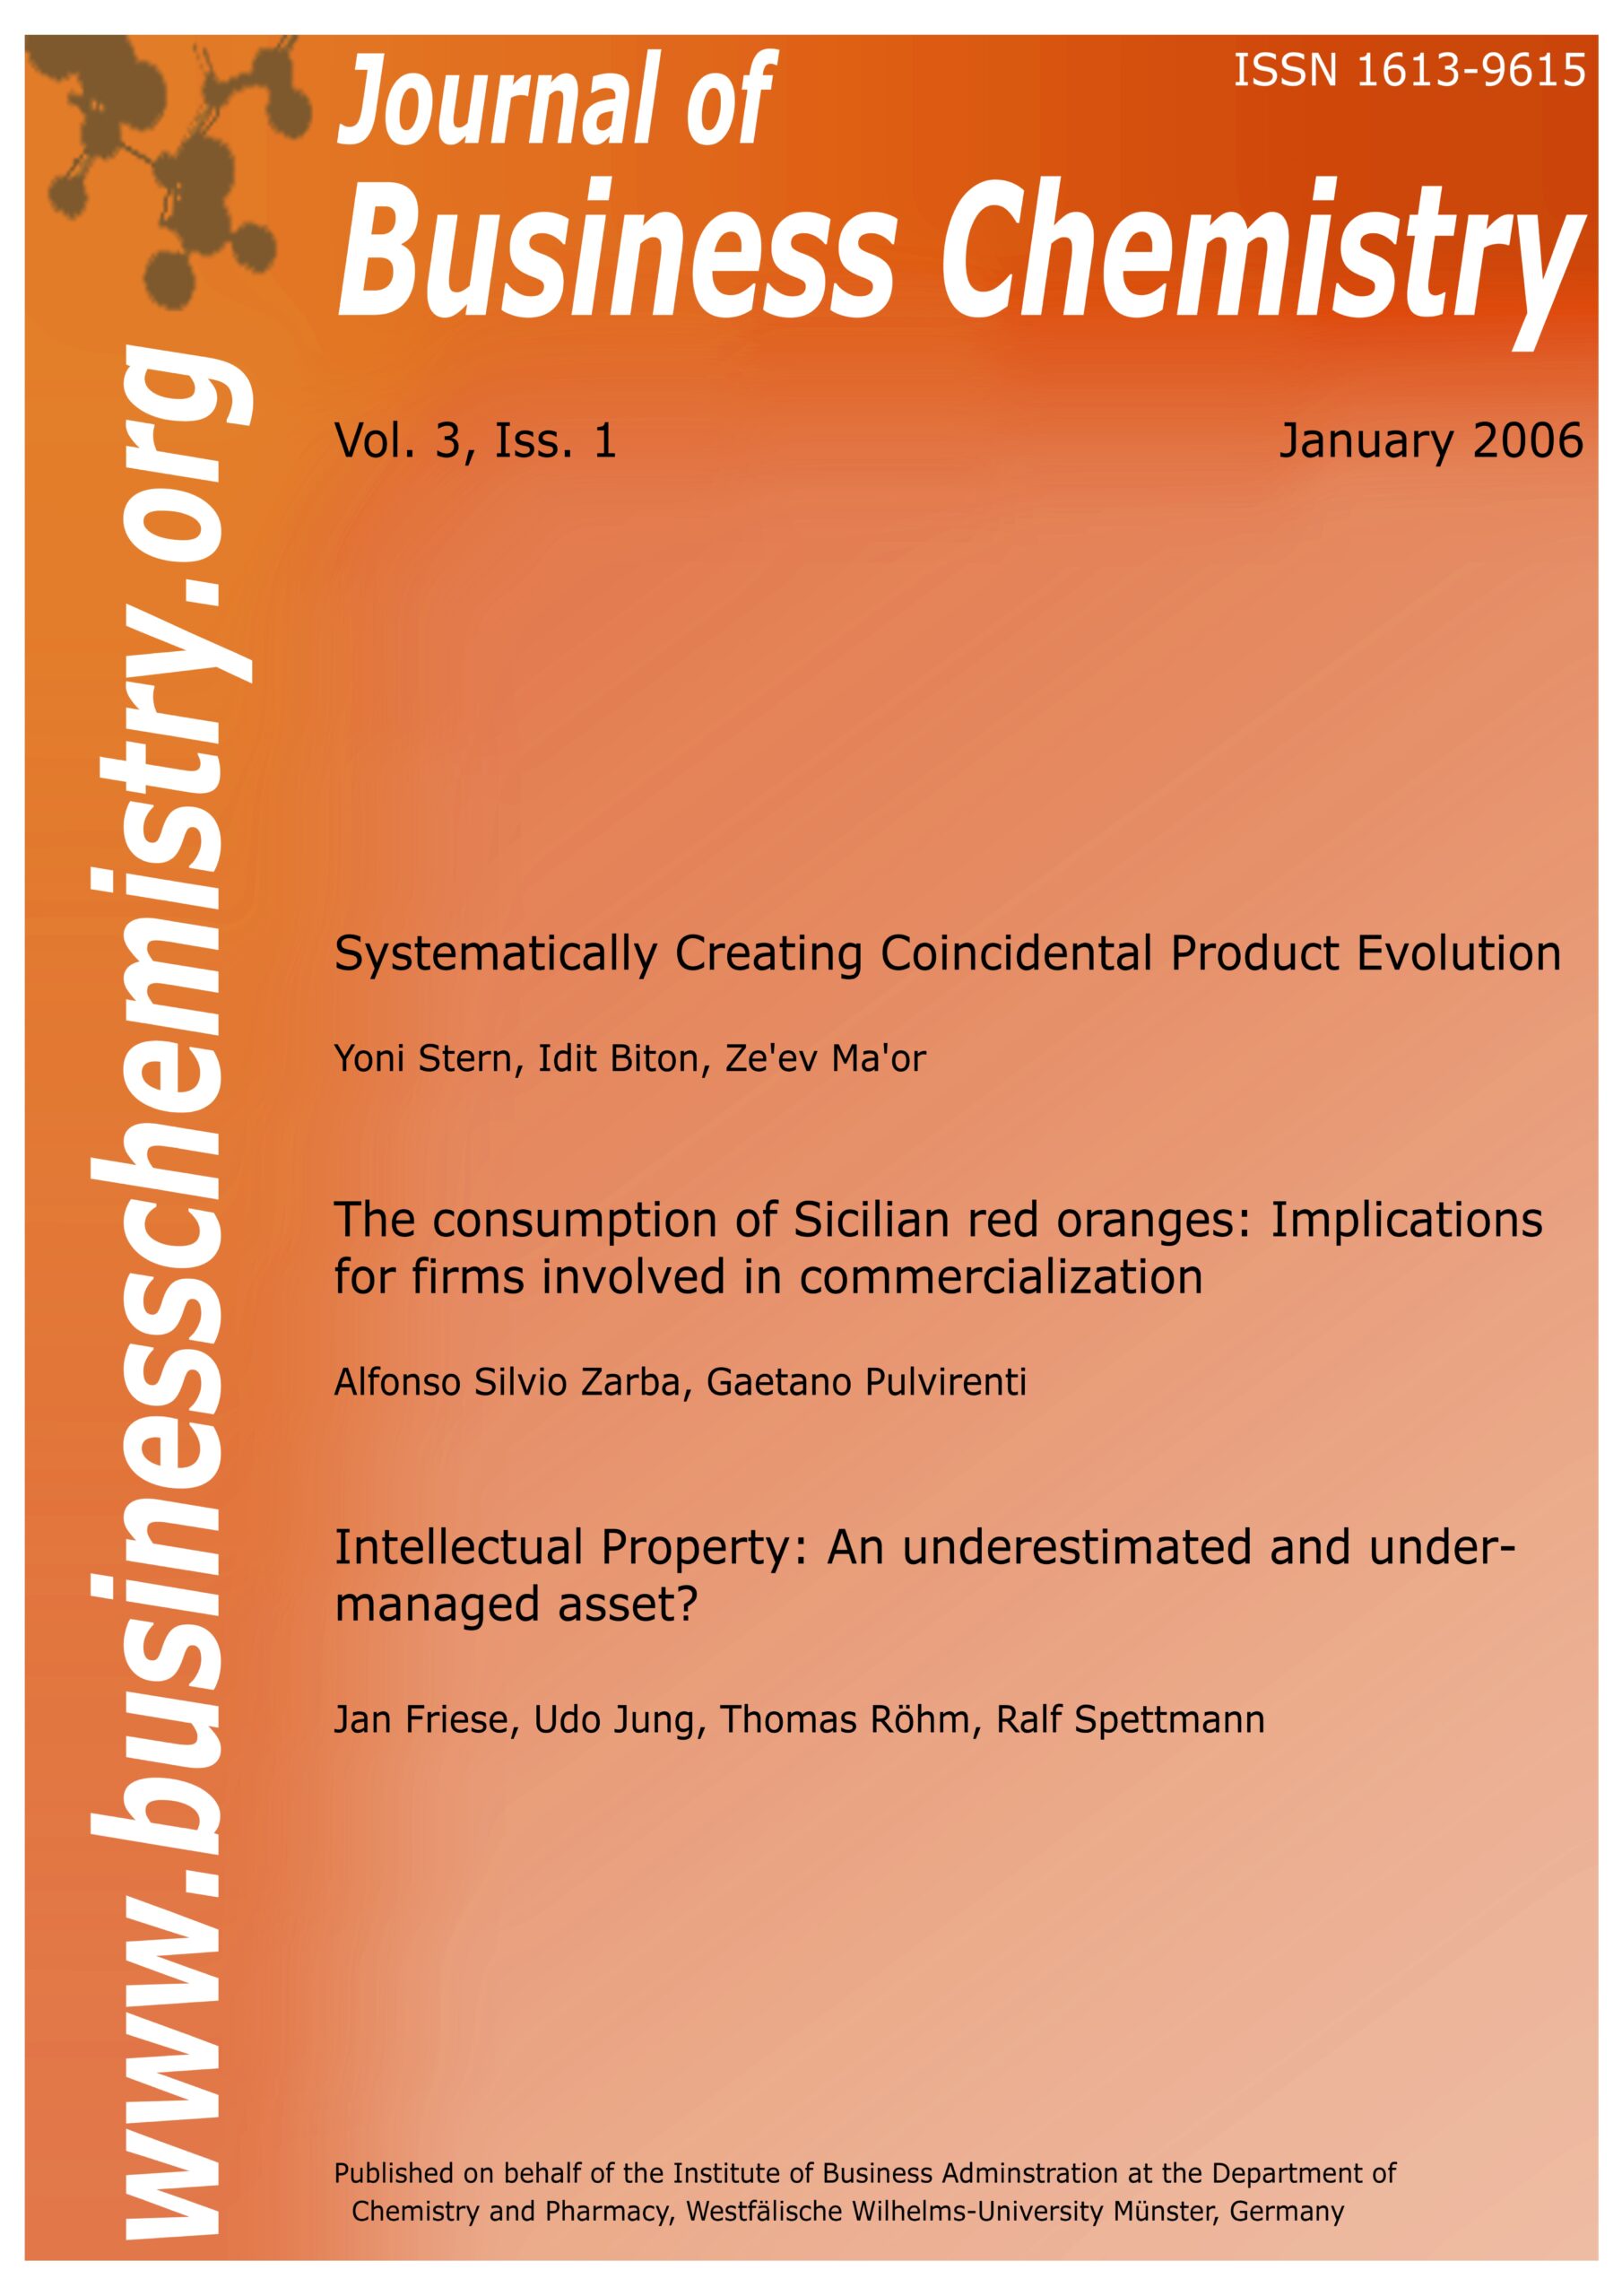 Journal of Business Chemistry January 2006